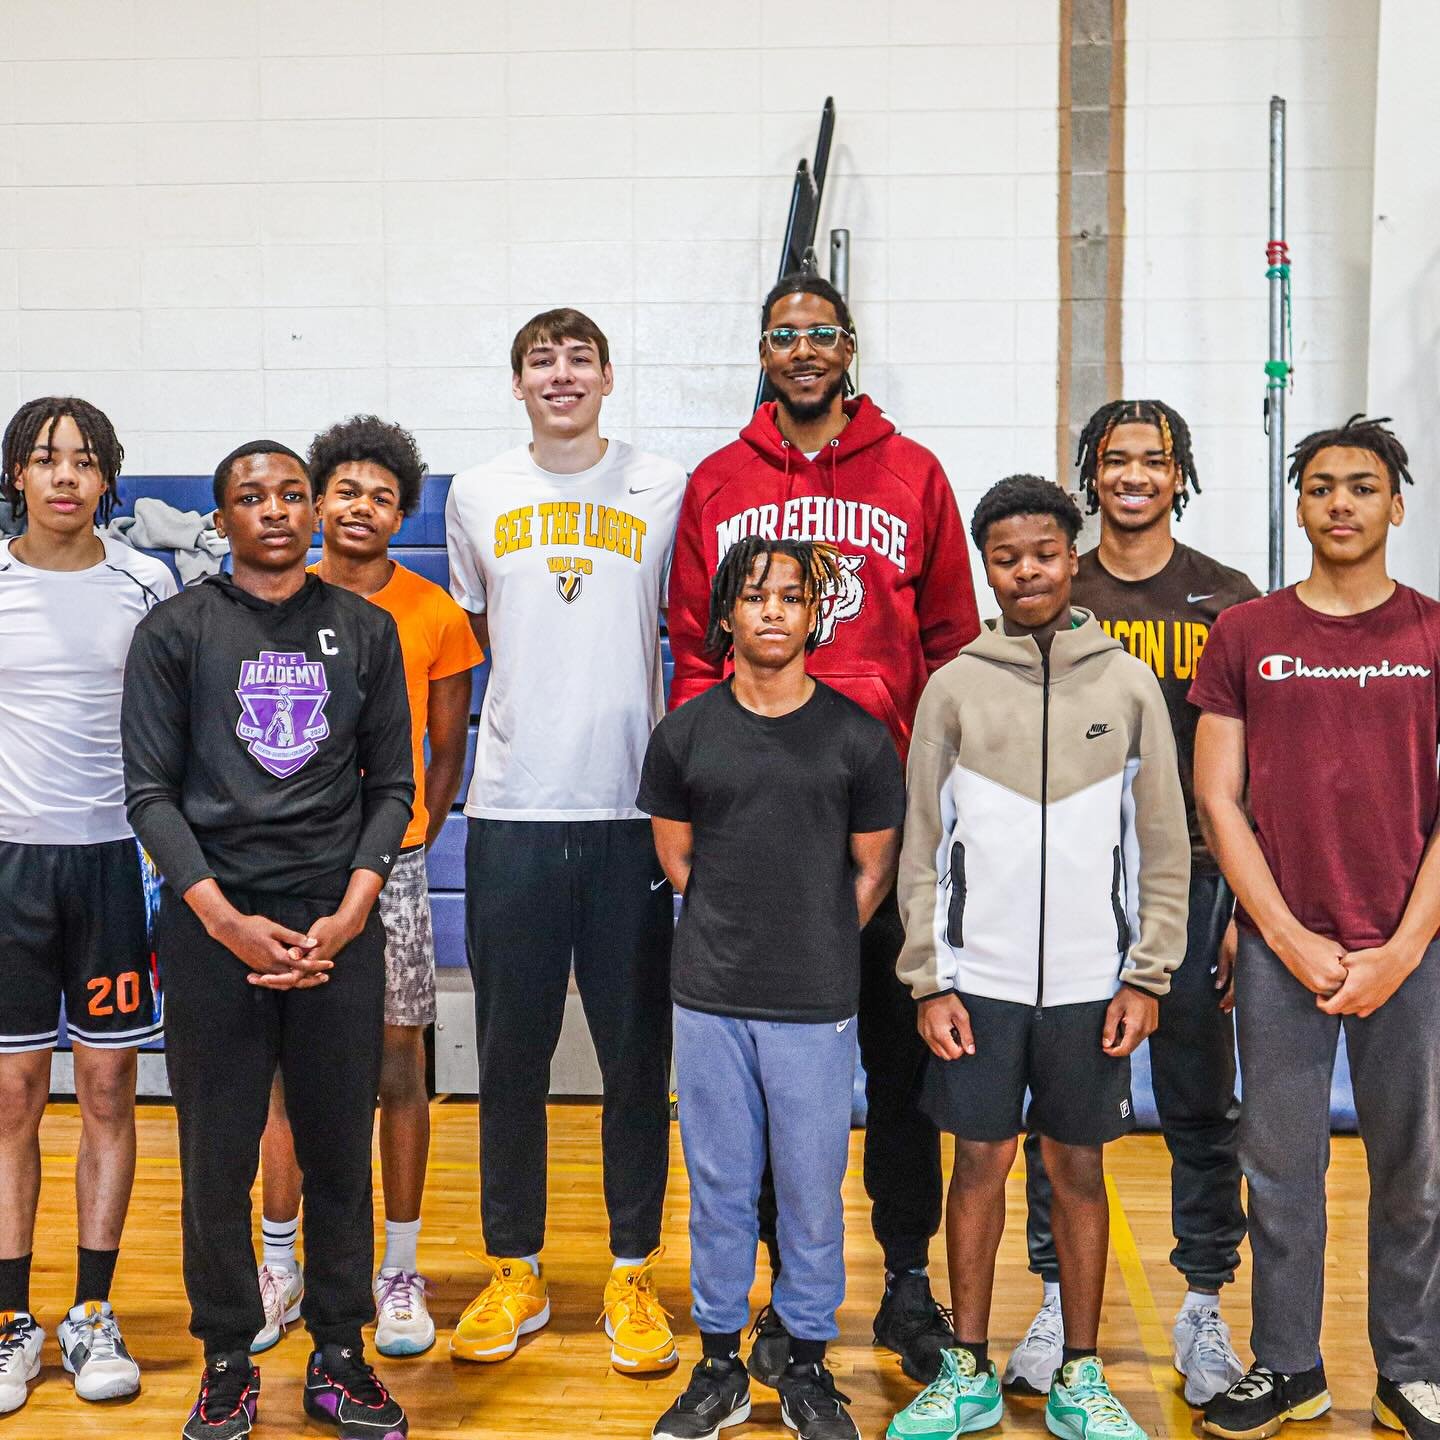 Big thanks to @cooper_schwieger and Isaiah Stafford of @valpobasketball for spending the afternoon with our student-athletes at The Academy! They spoke to our student-athletes about life as D1 basketball players, the importance of academics, the hard